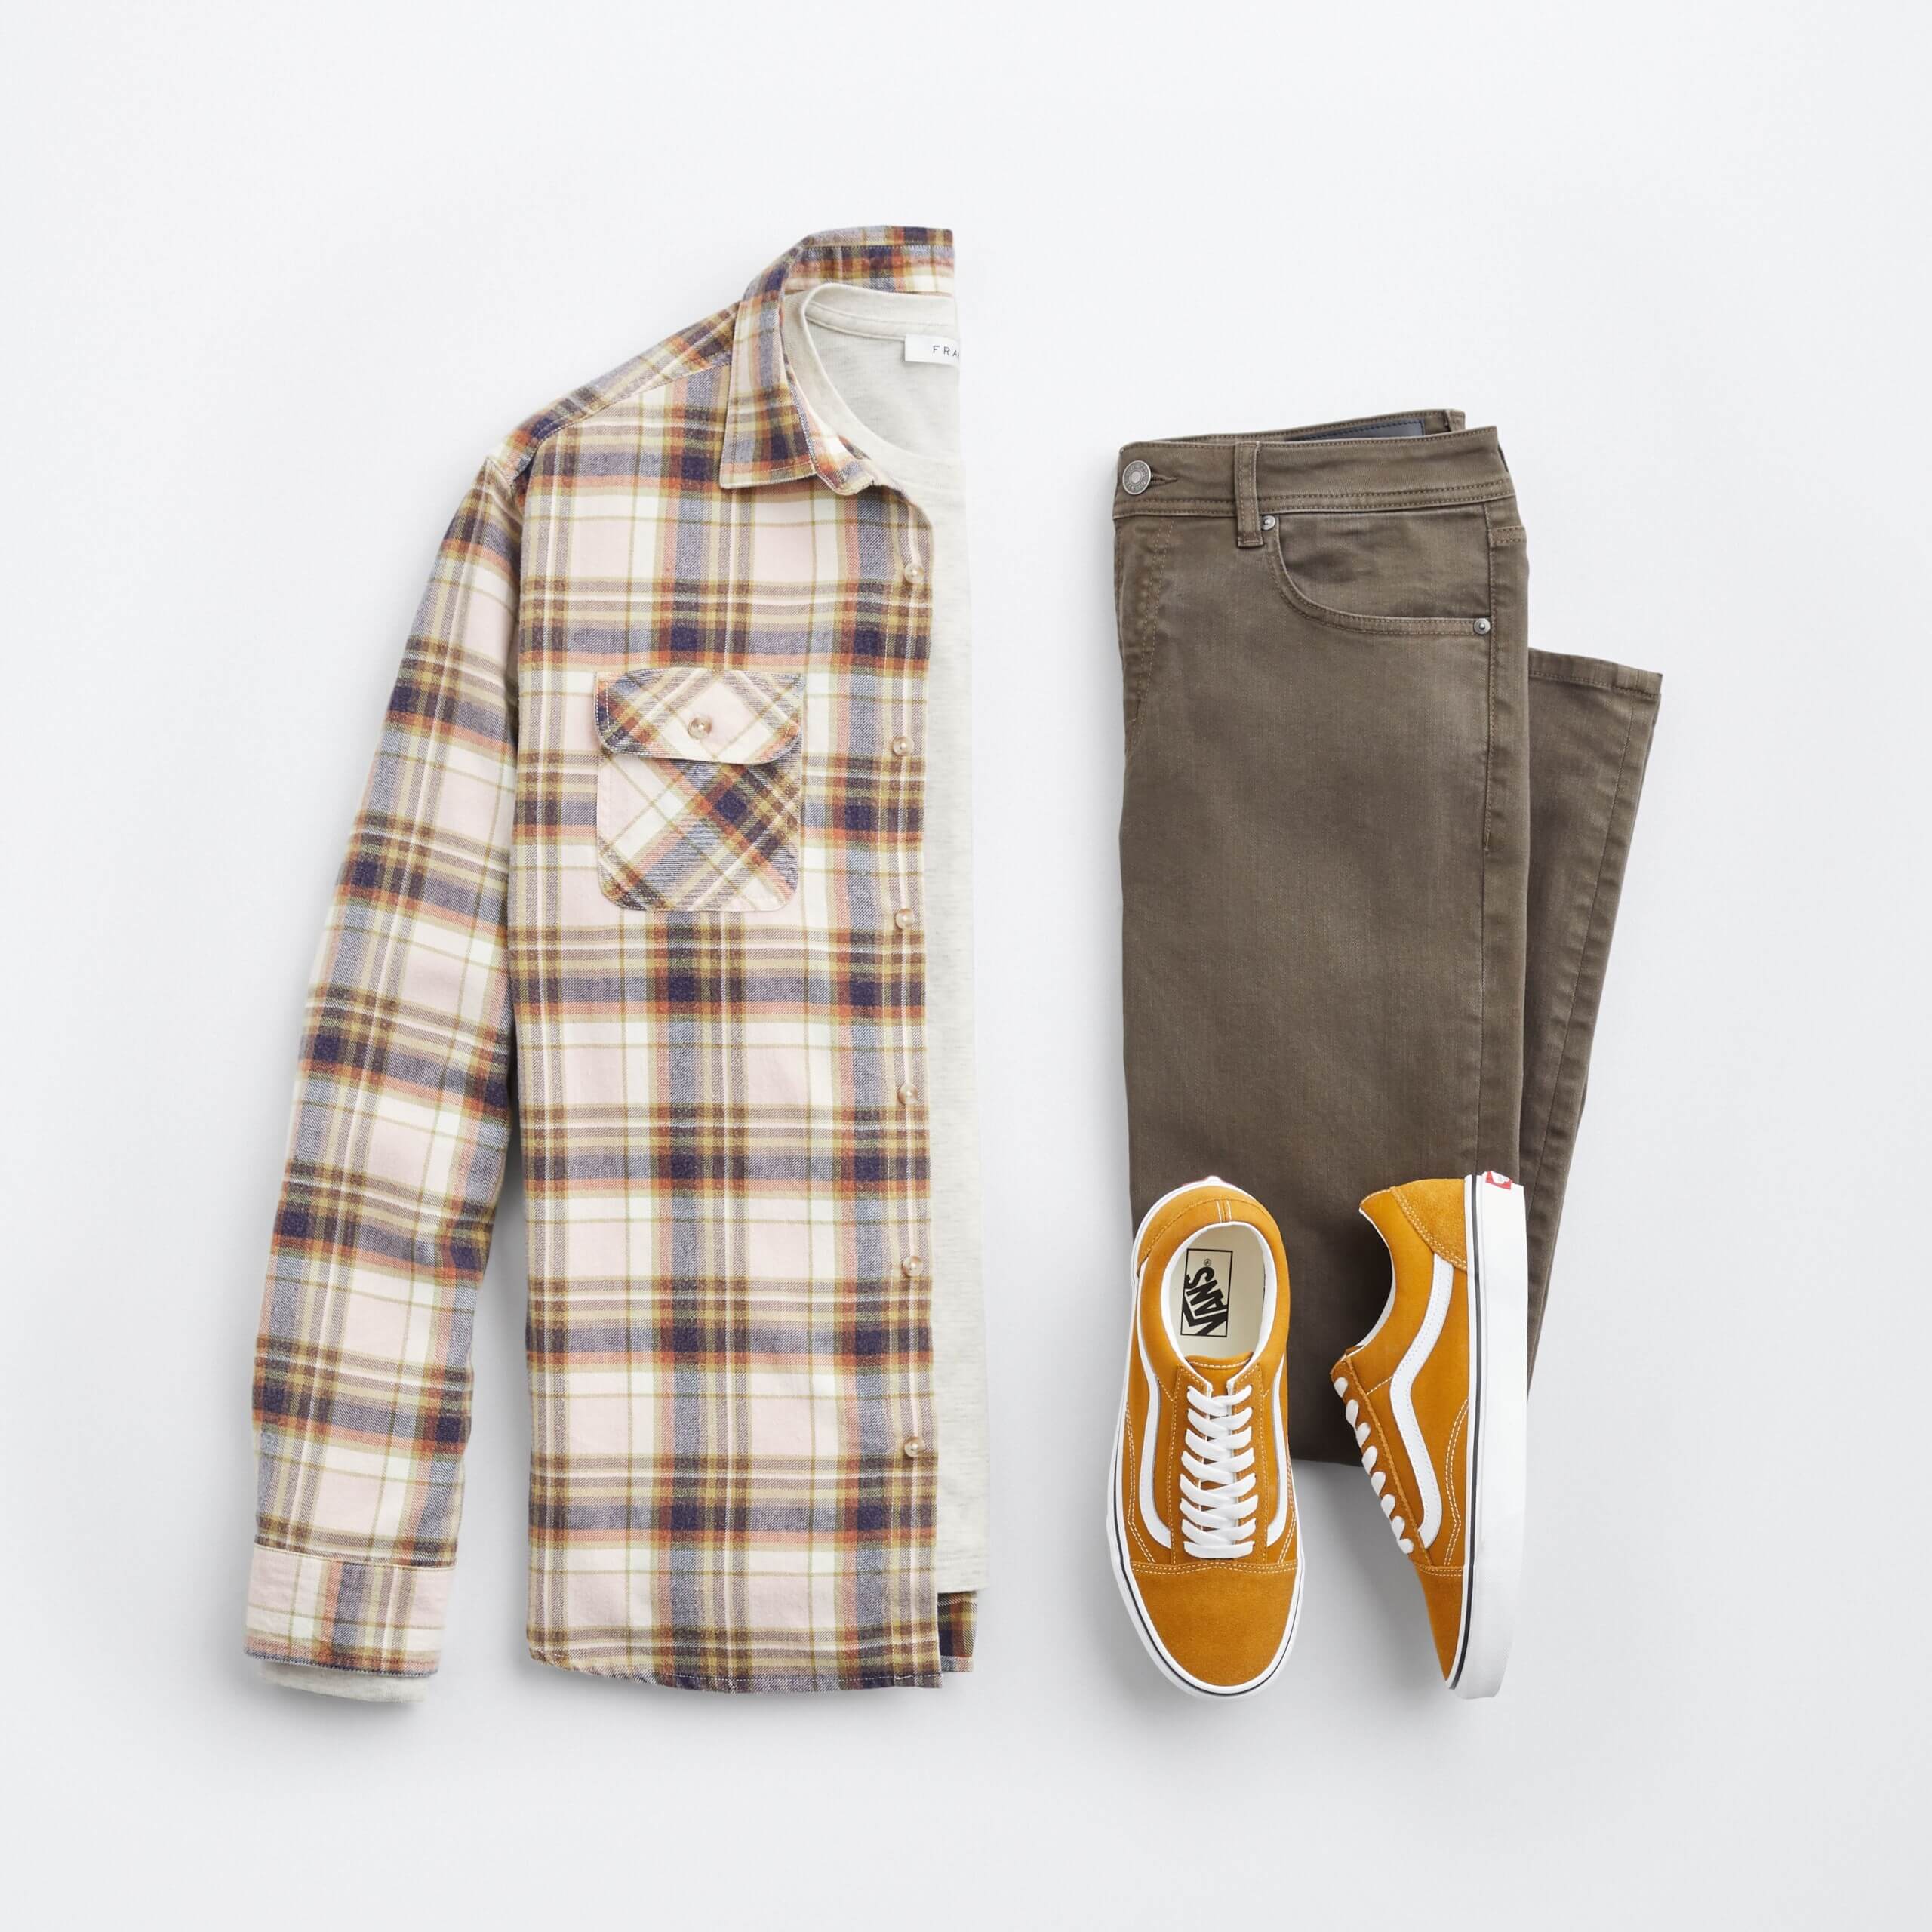 How to Pair Men's Pants + Shoes - 55425